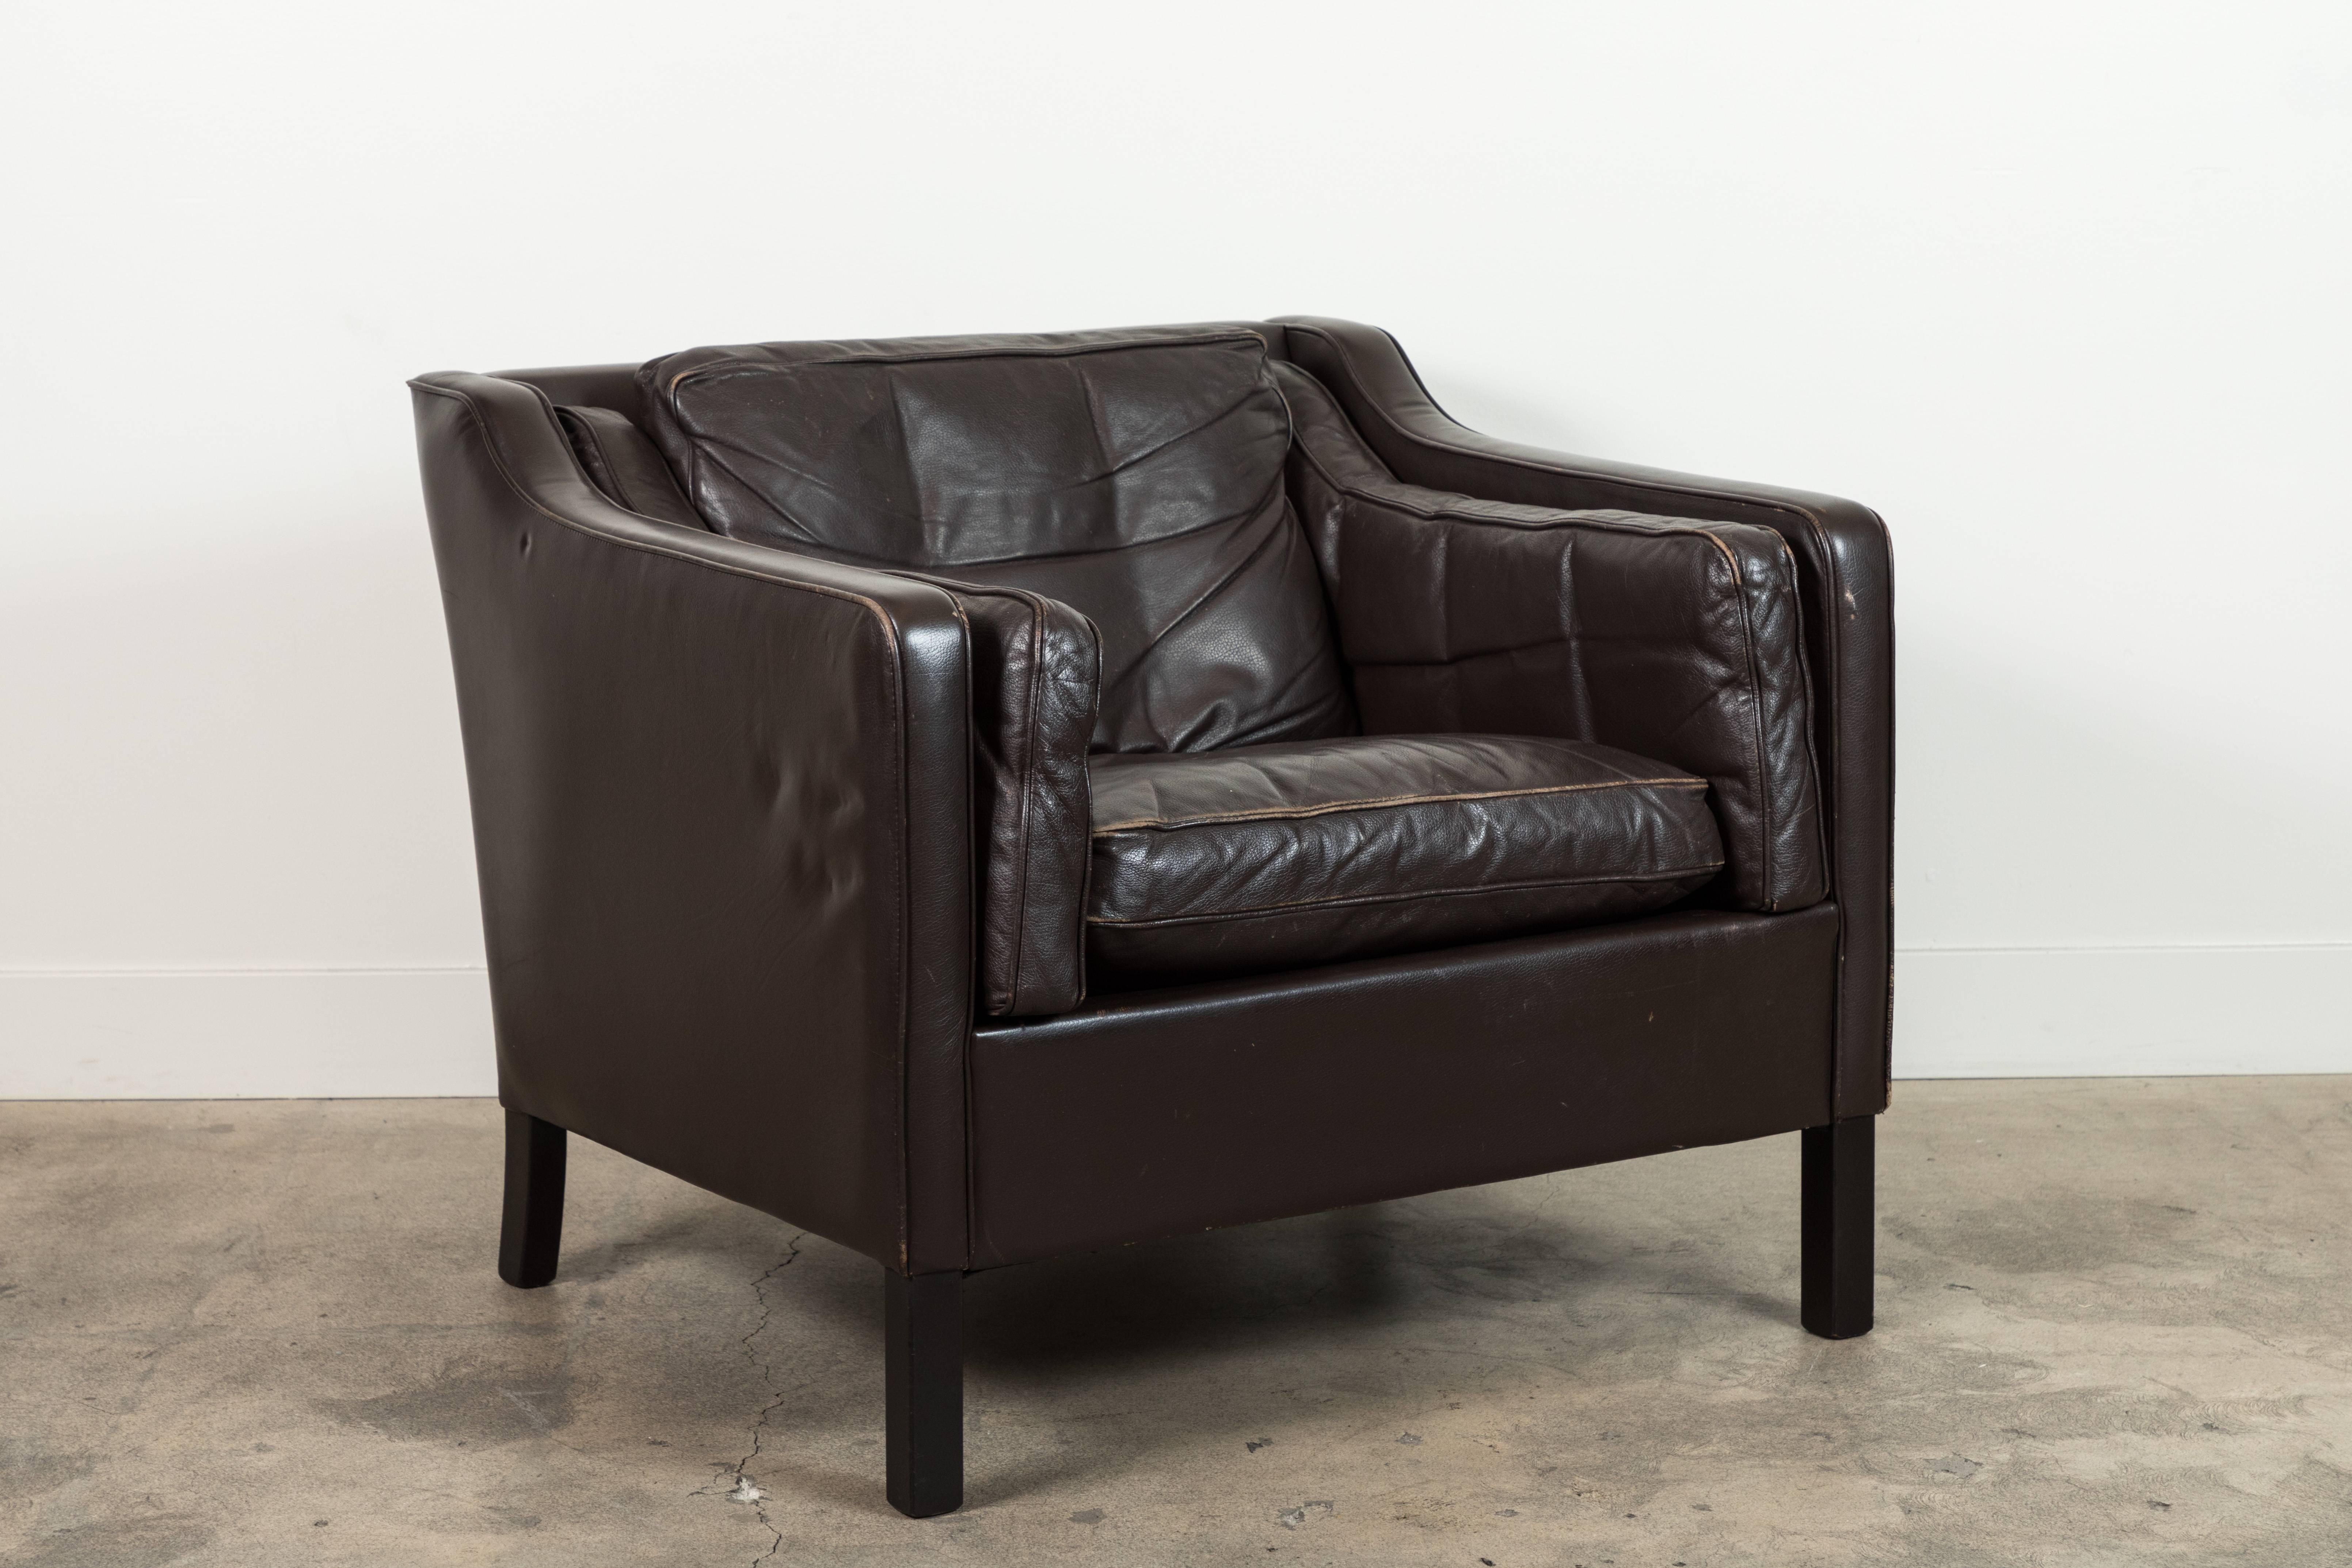 Danish leather club chair in the style of Børge Mogensen.